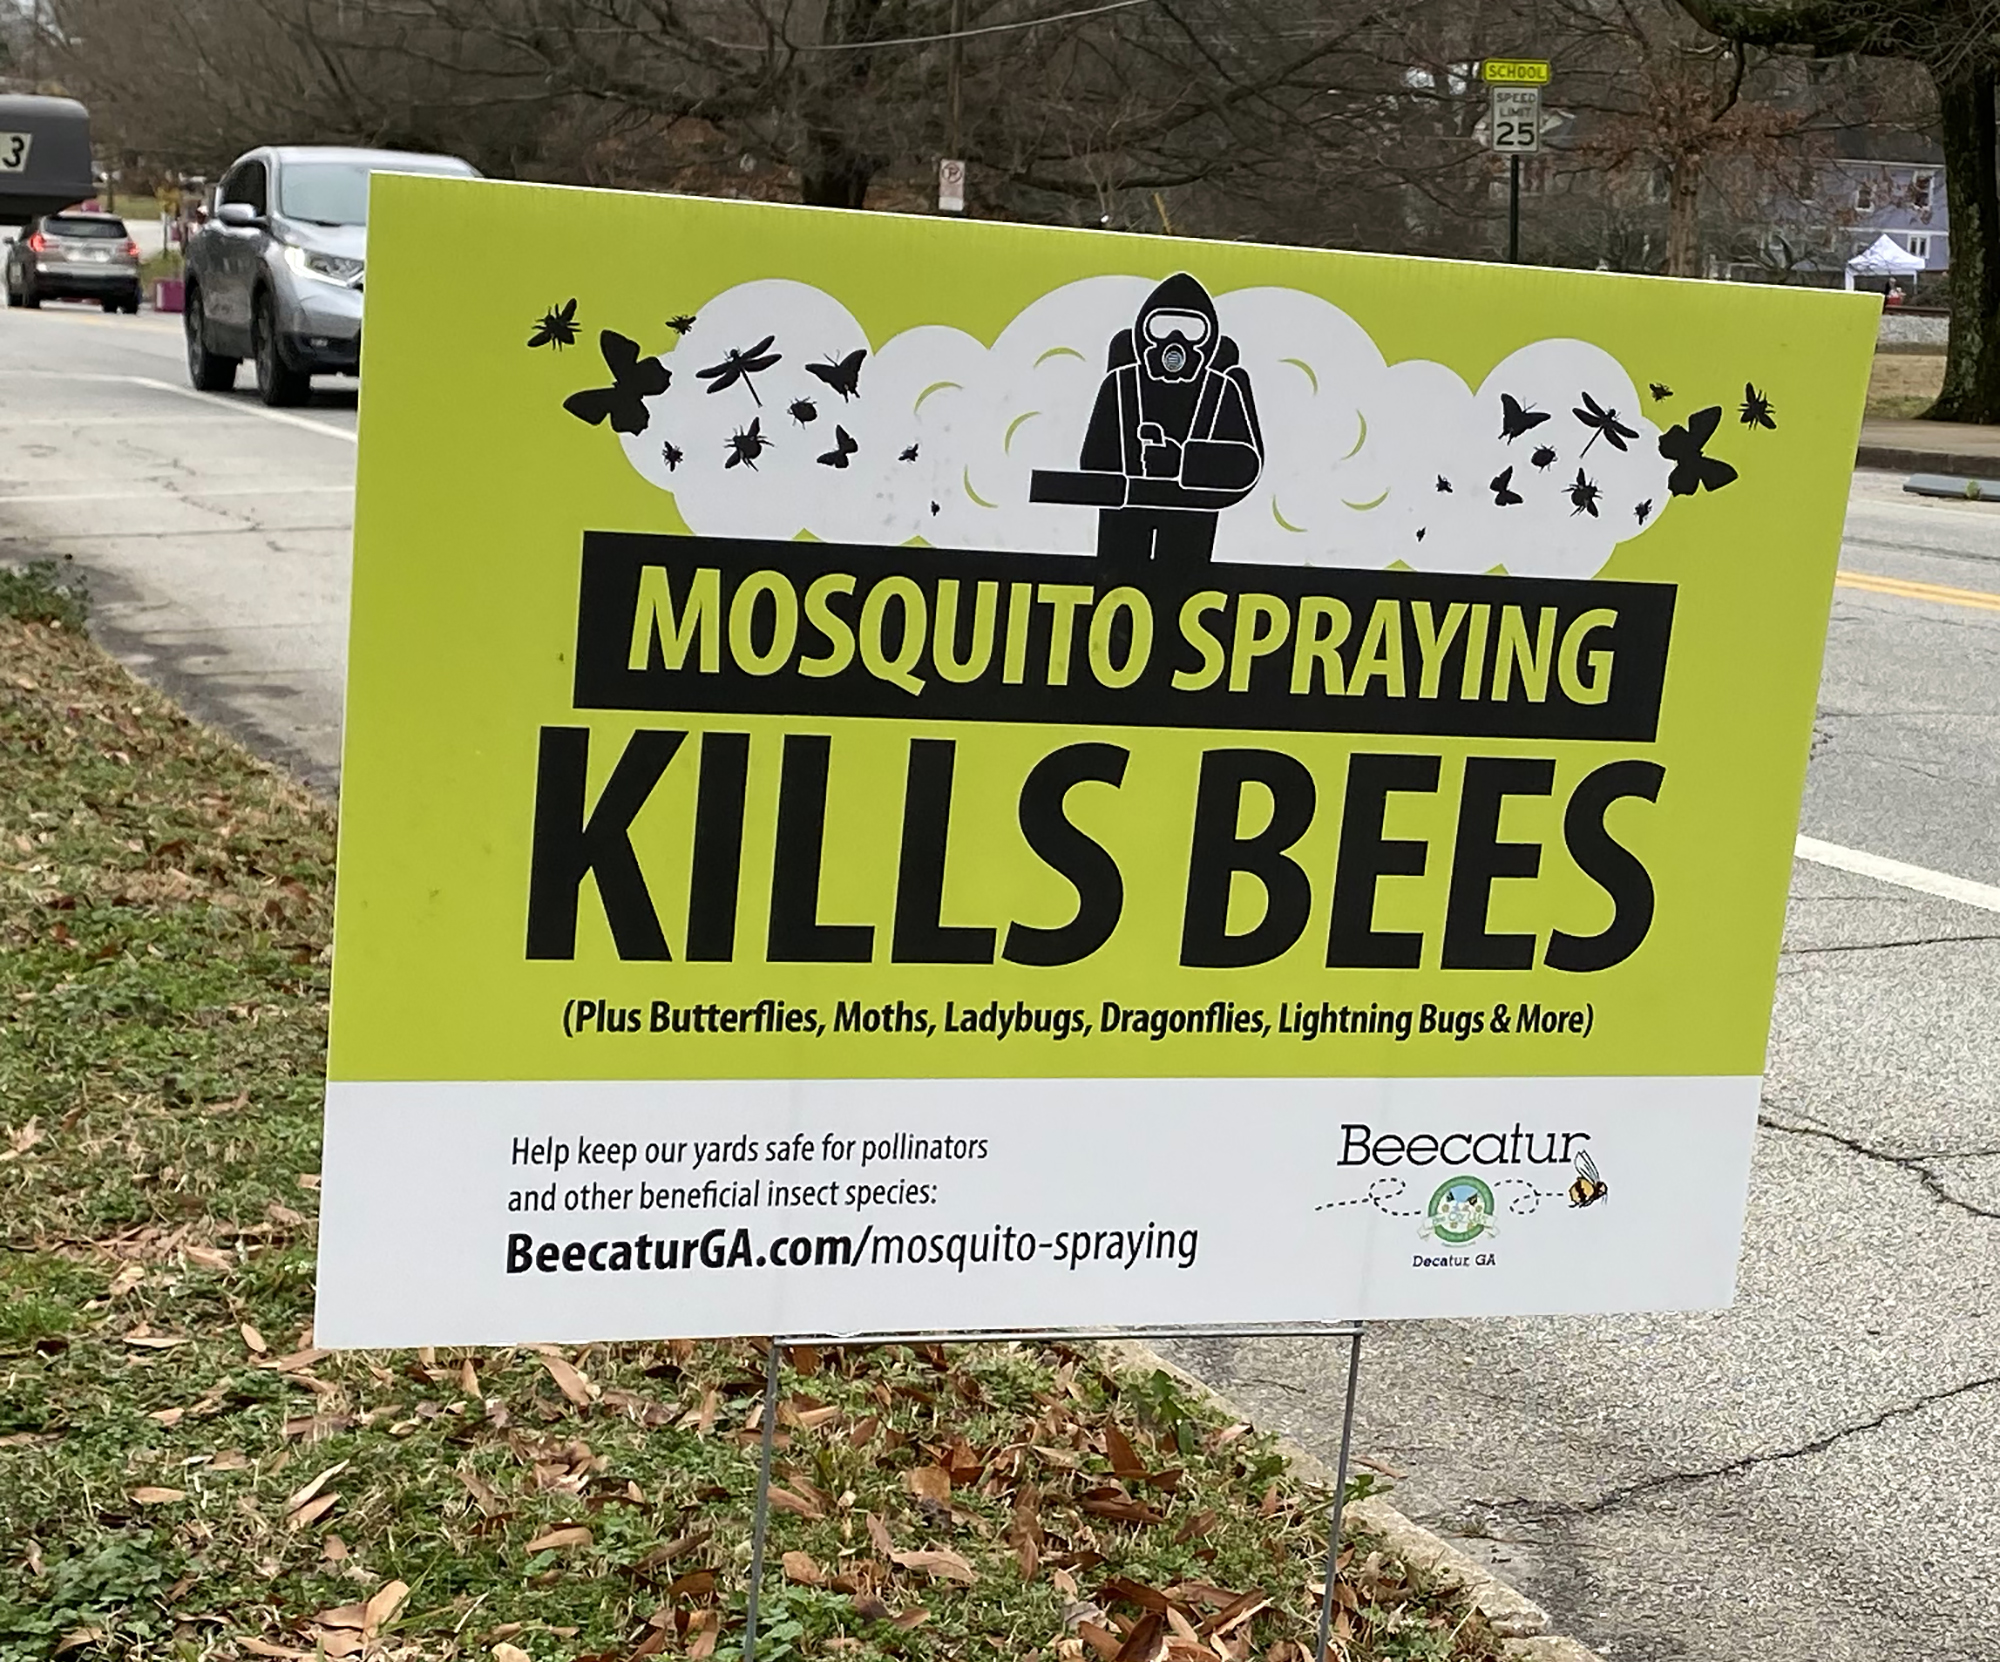 A bright green and white lawn sign declares "mosquito spraying kills bees". Cars drive along the road behind.